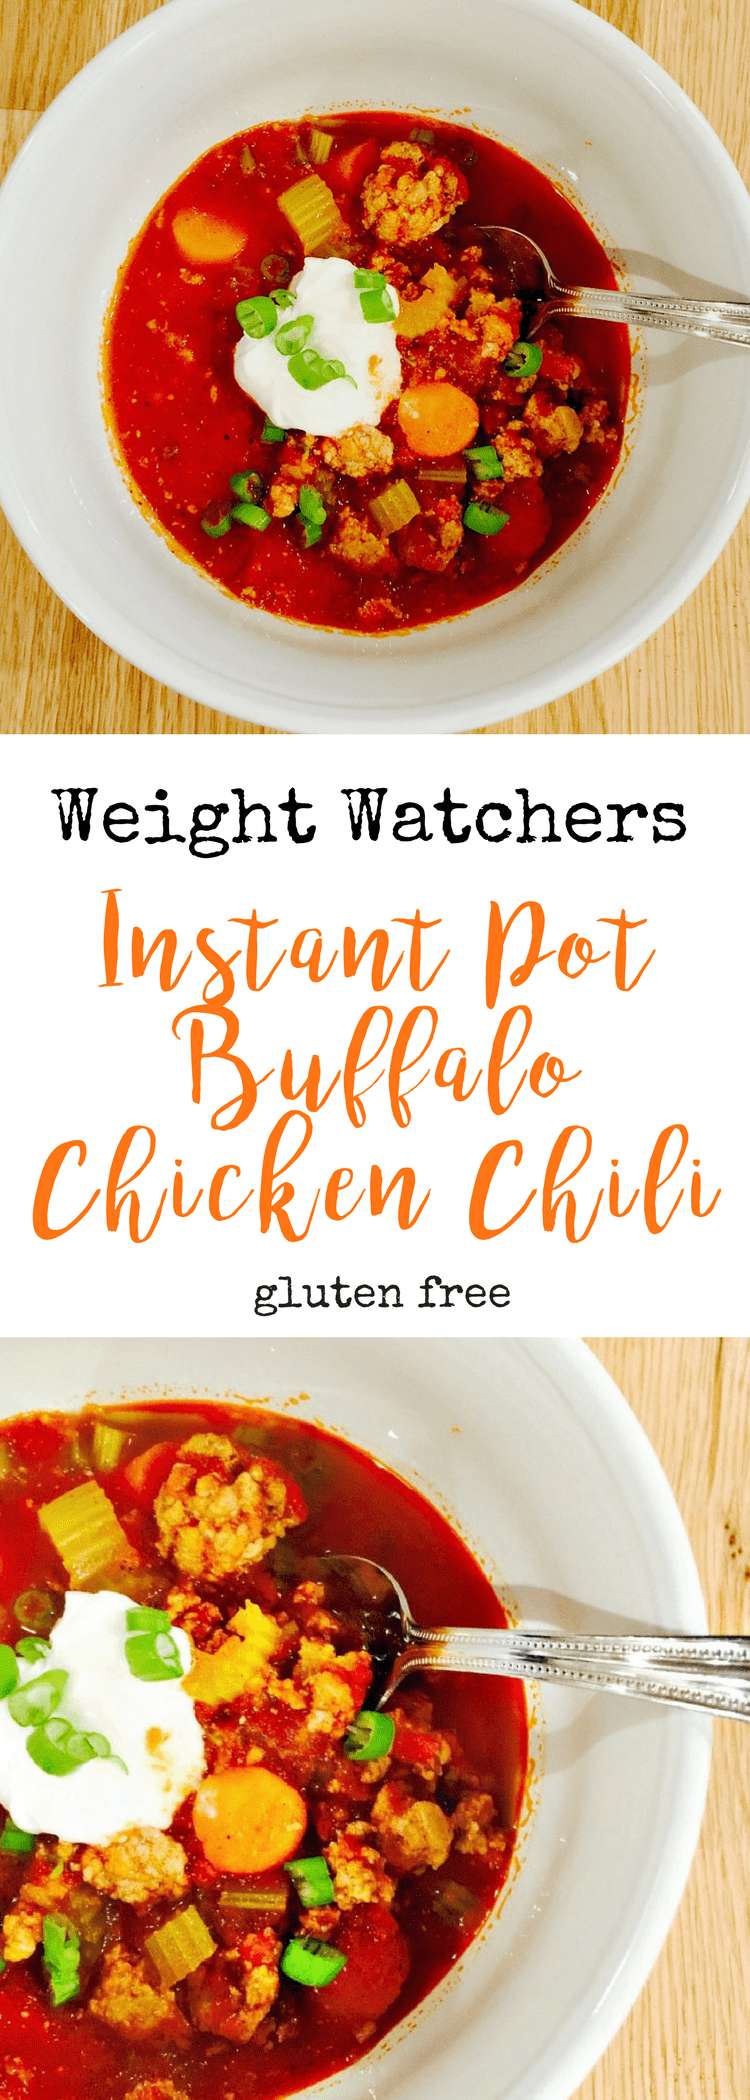 Weight Watchers Instant Pot Buffalo Chicken Chili | Confessions of a Fit Foodie